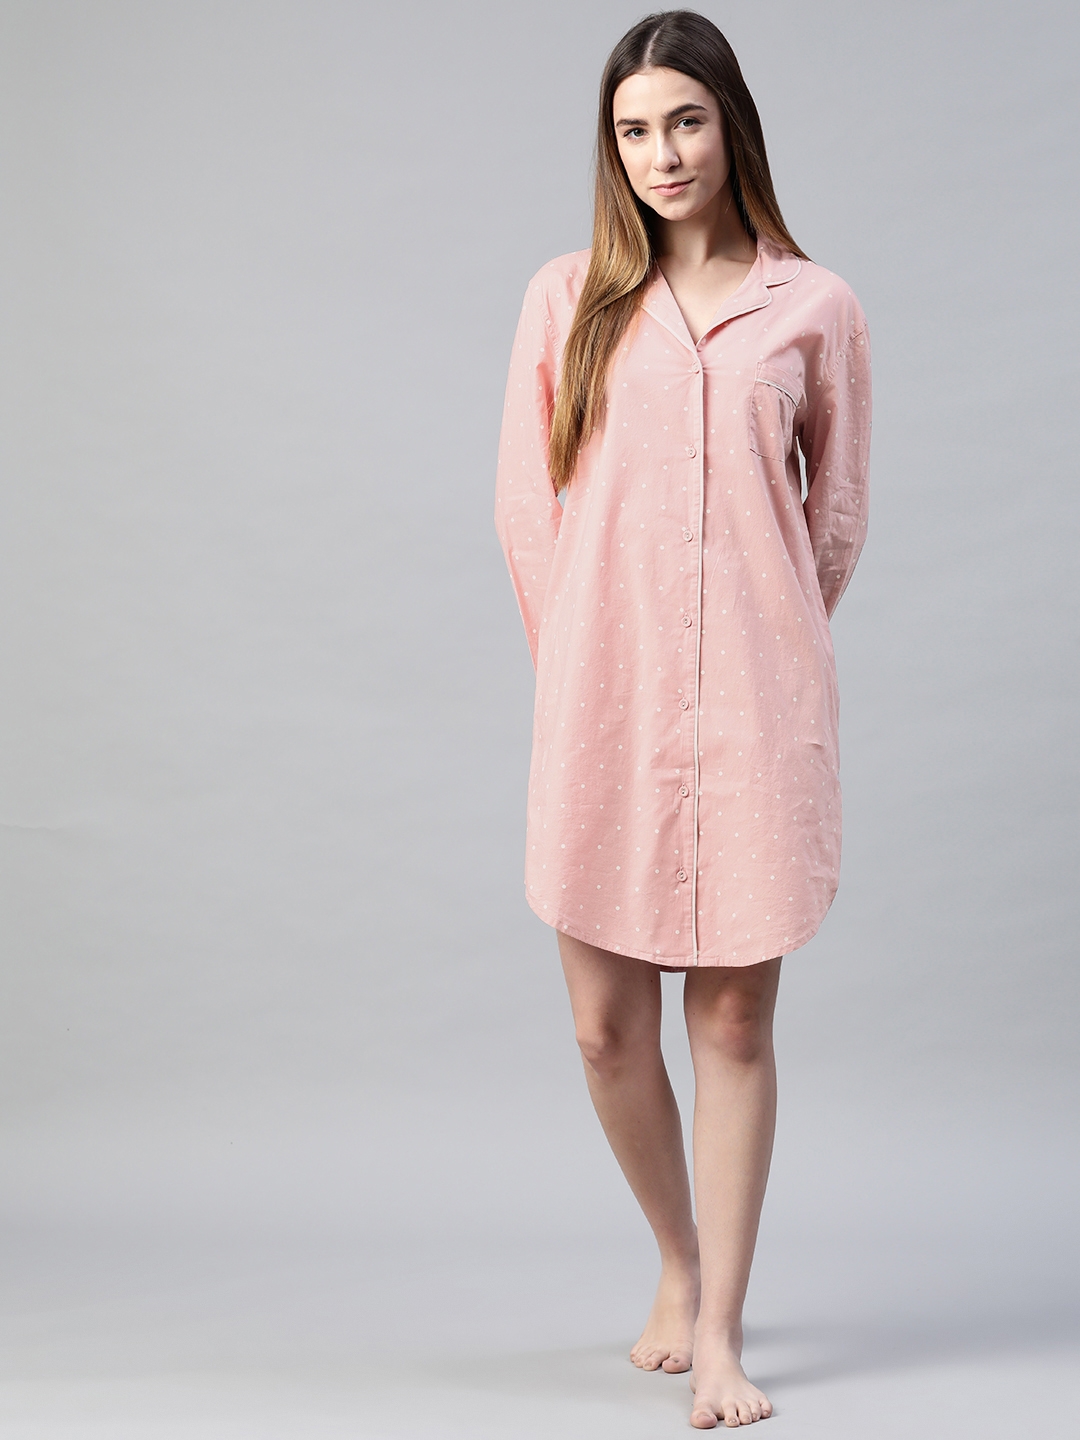 Marks & Spencer Pink & White Printed Cotton Nightdress